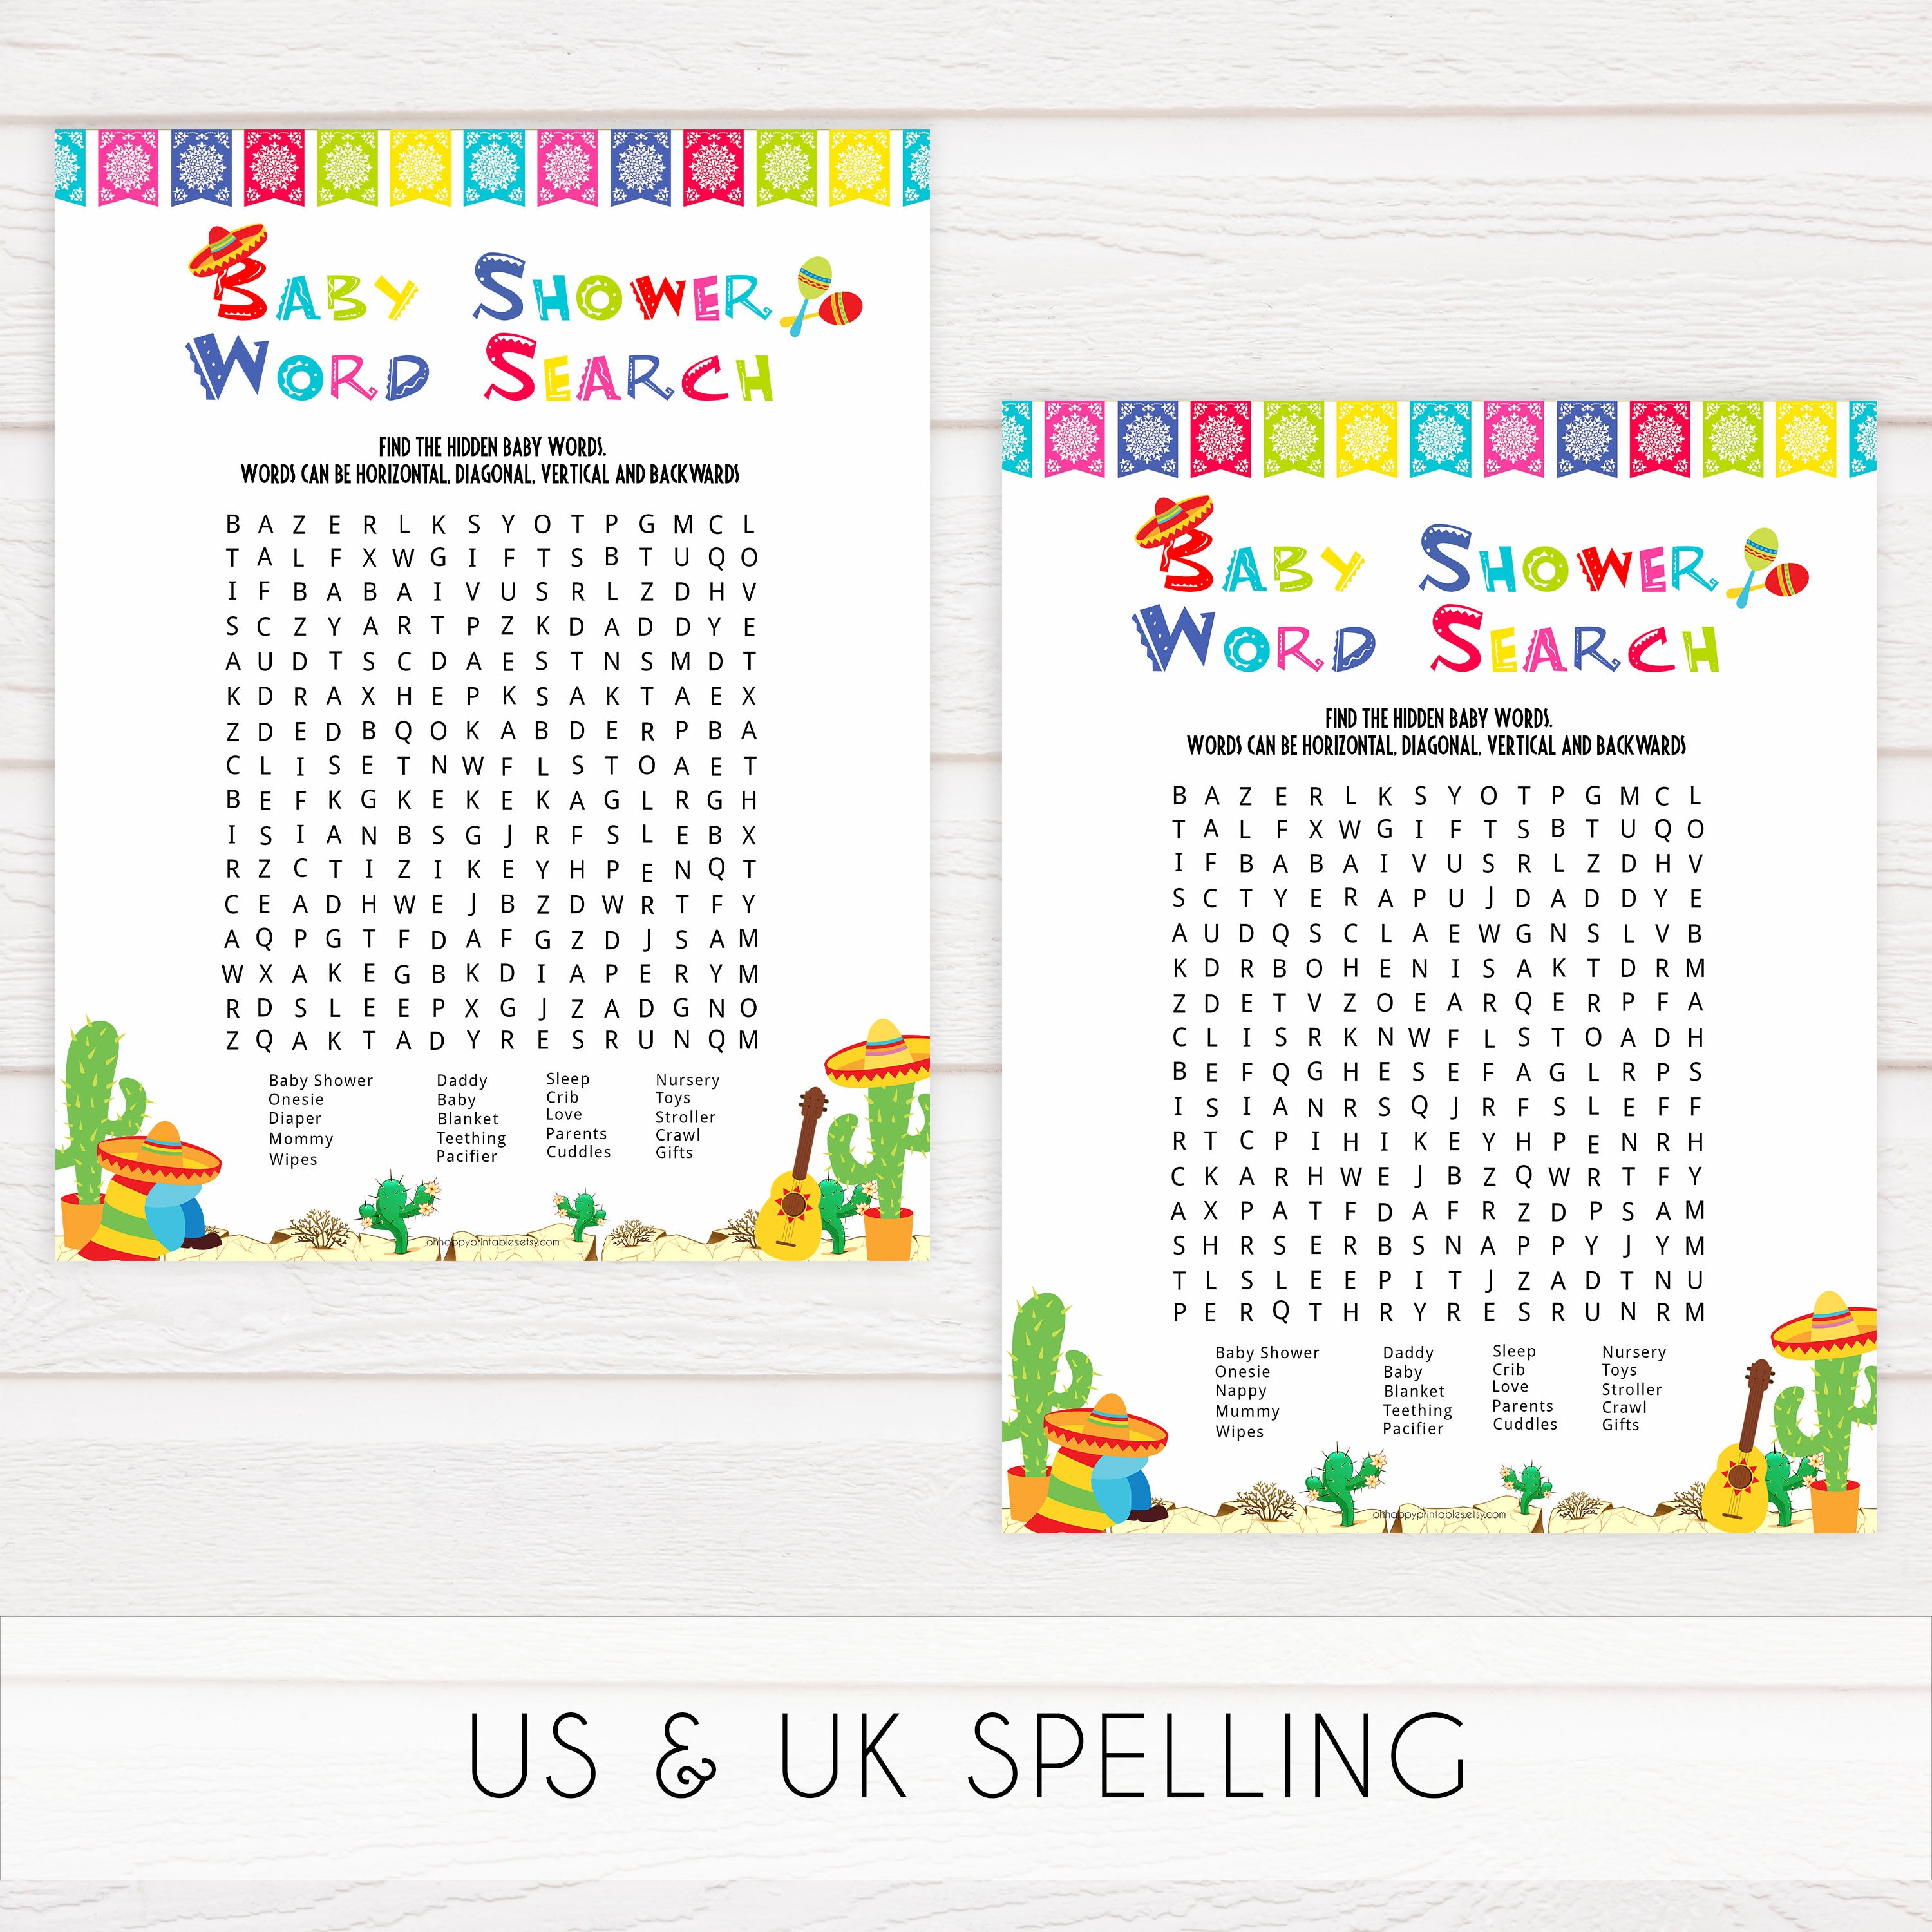 baby shower word search game, Printable baby shower games, Mexican fiesta fun baby games, baby shower games, fun baby shower ideas, top baby shower ideas, fiesta shower baby shower, fiesta baby shower ideas